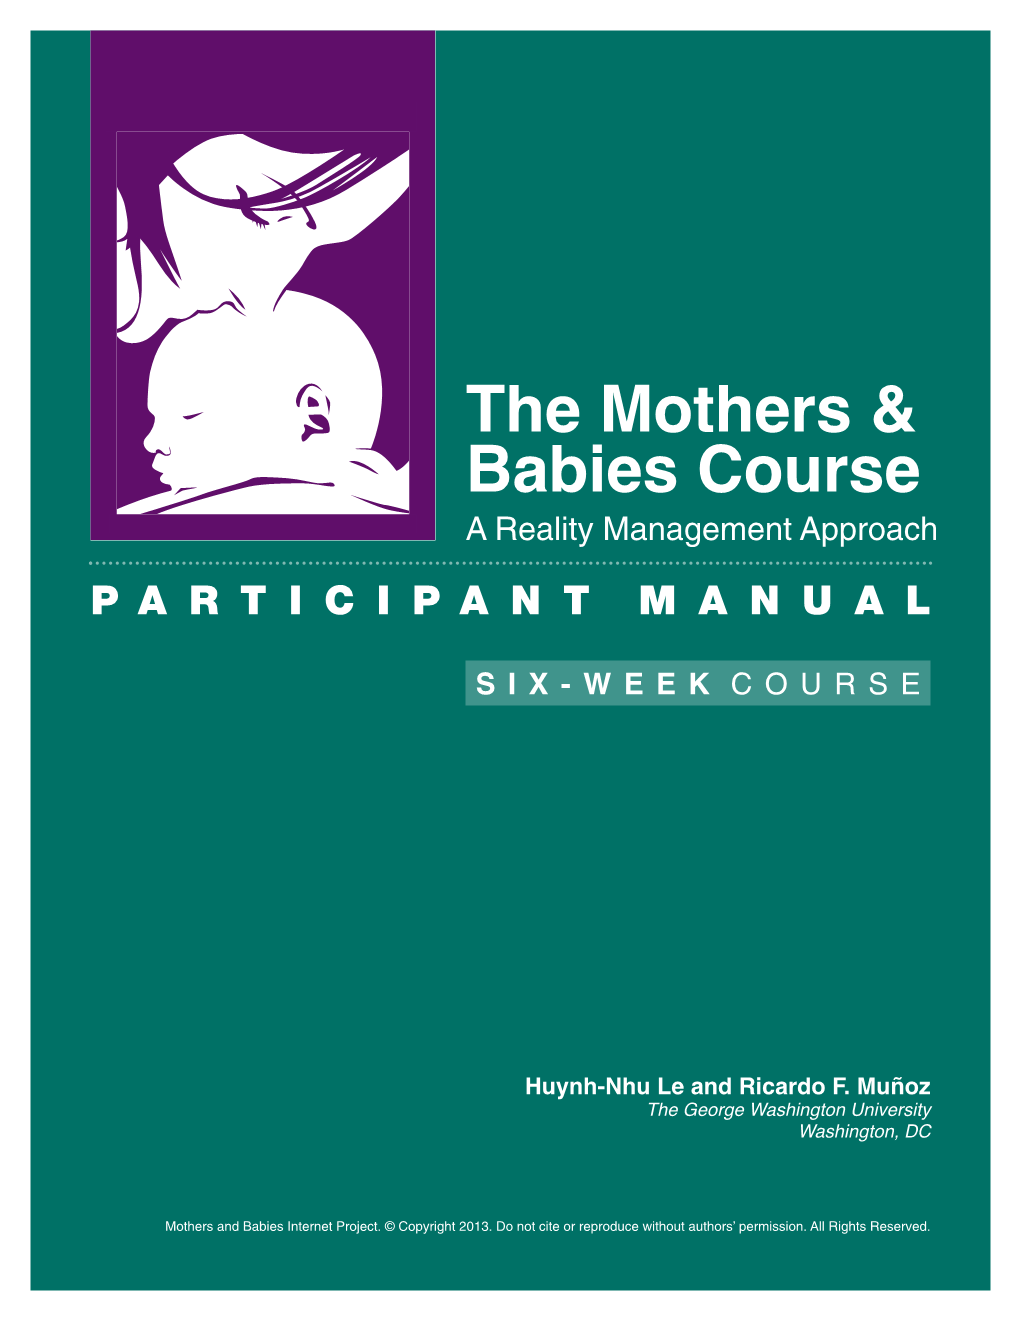 The Mothers & Babies Course